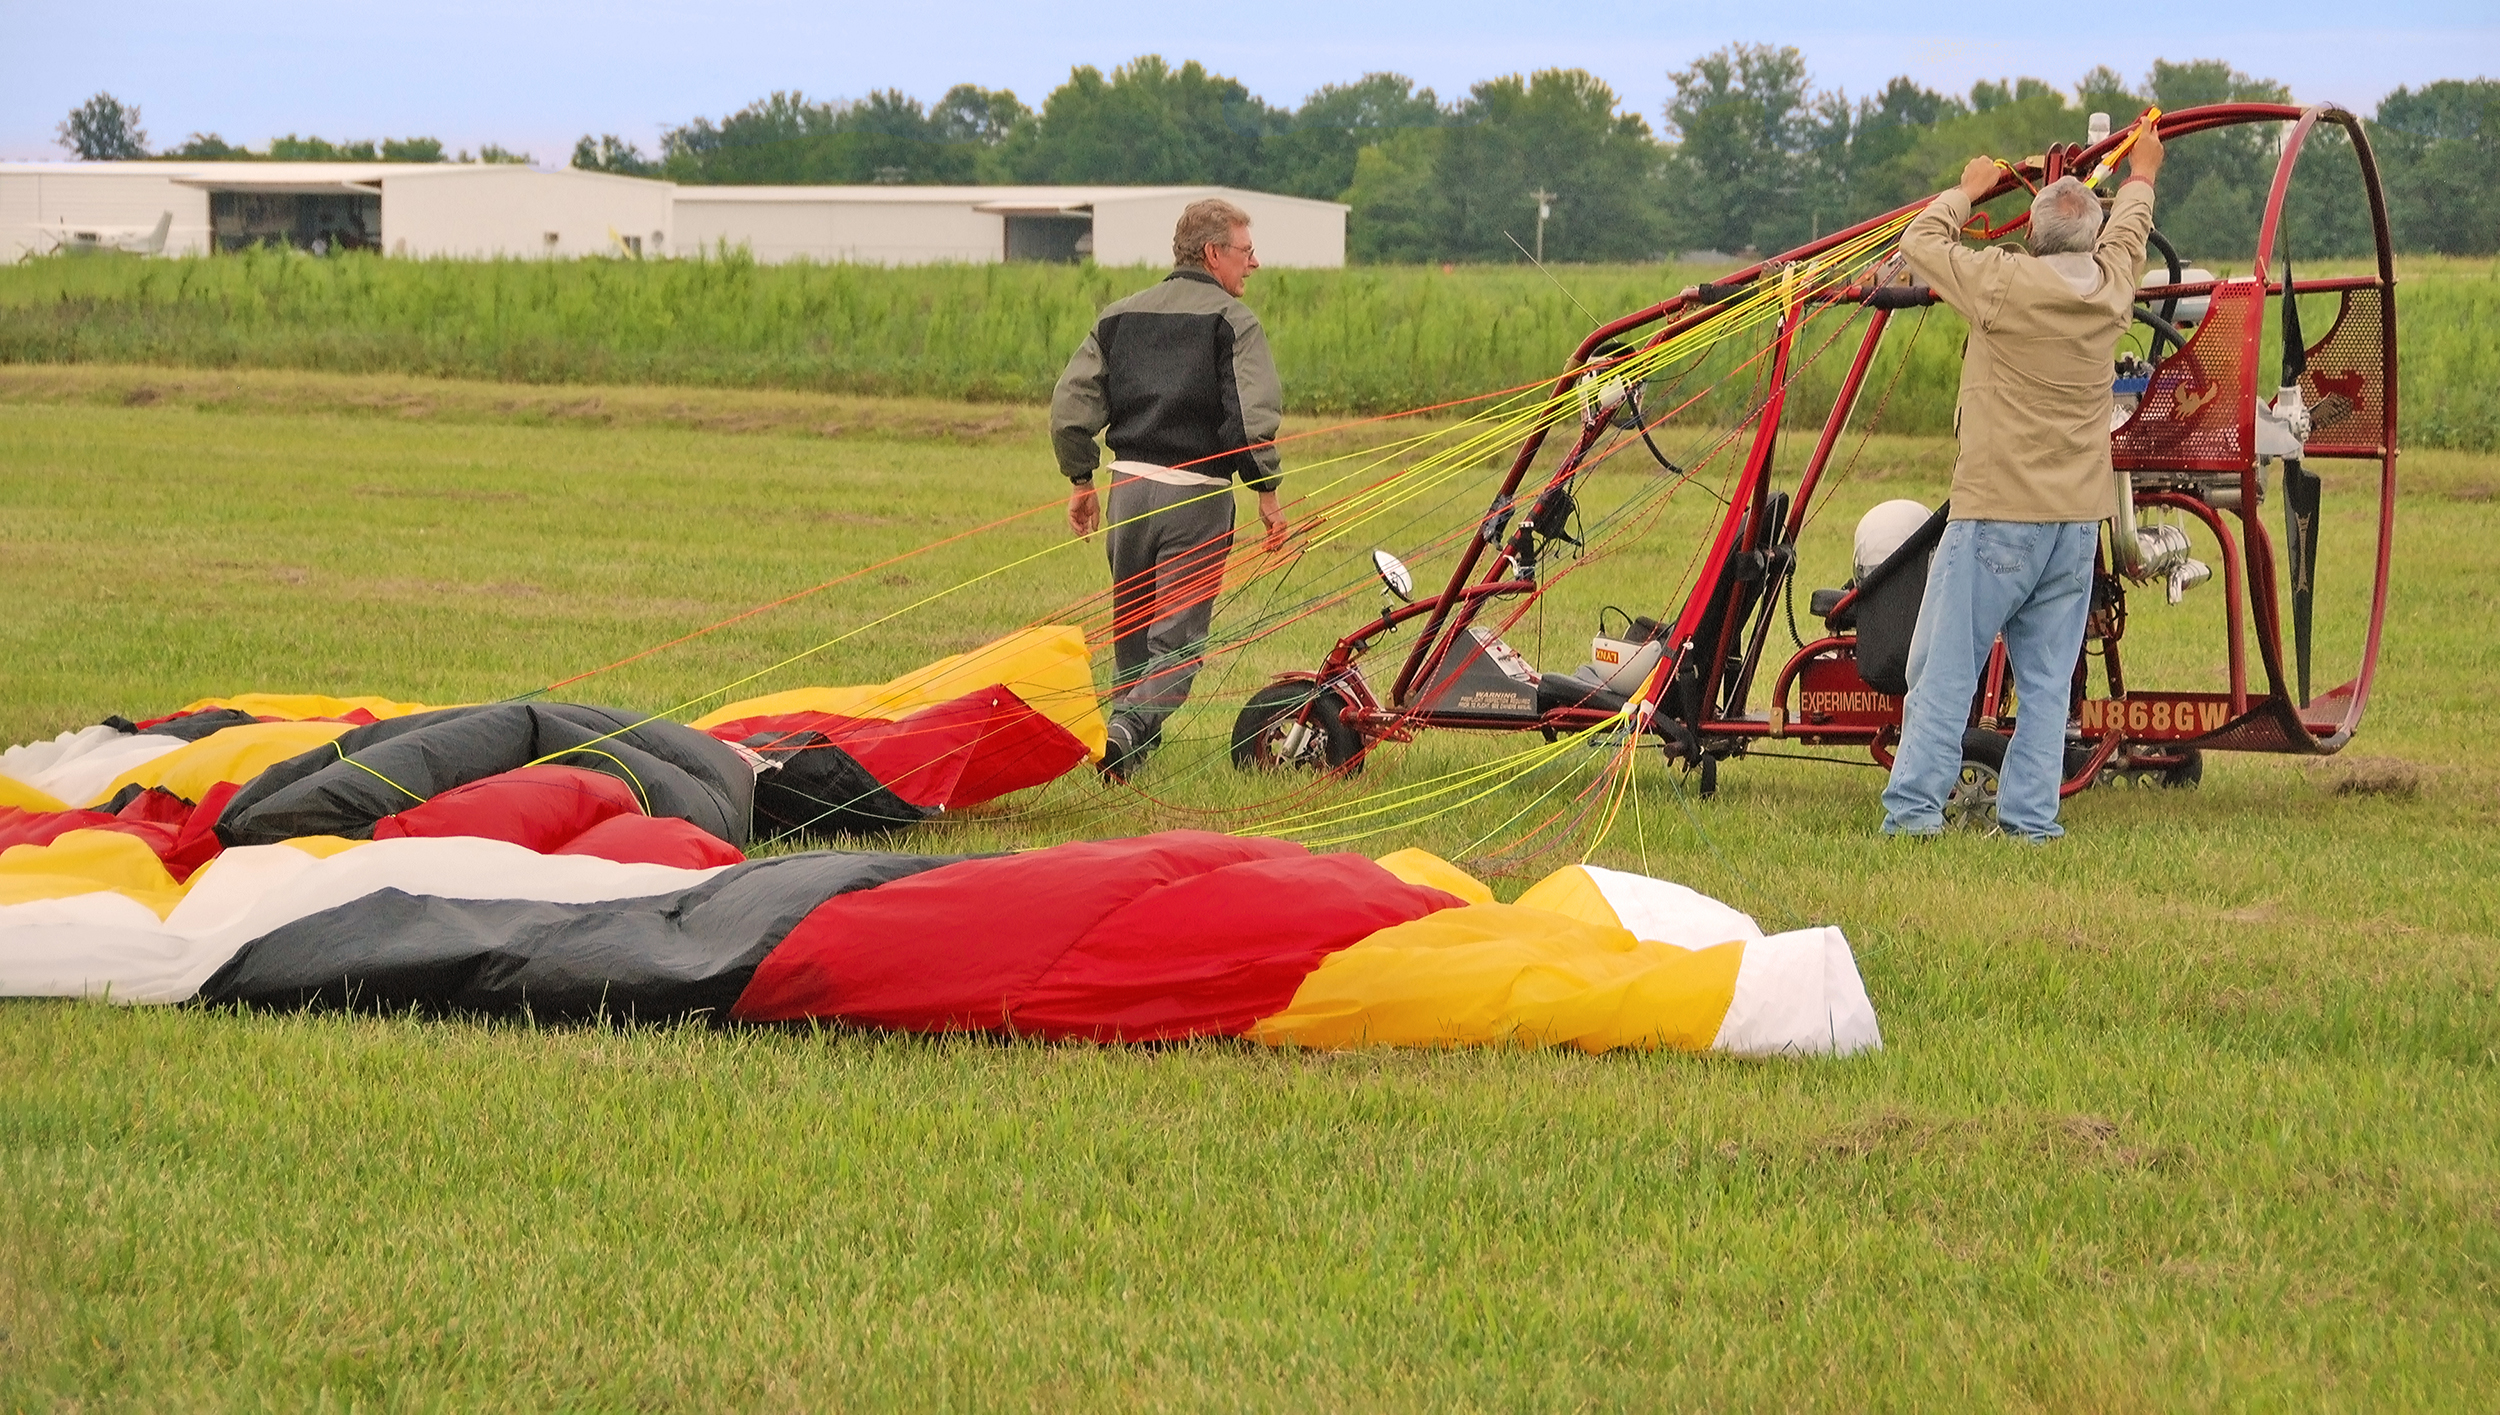 Straightening Out Parachute Lines at the Greenville Airport